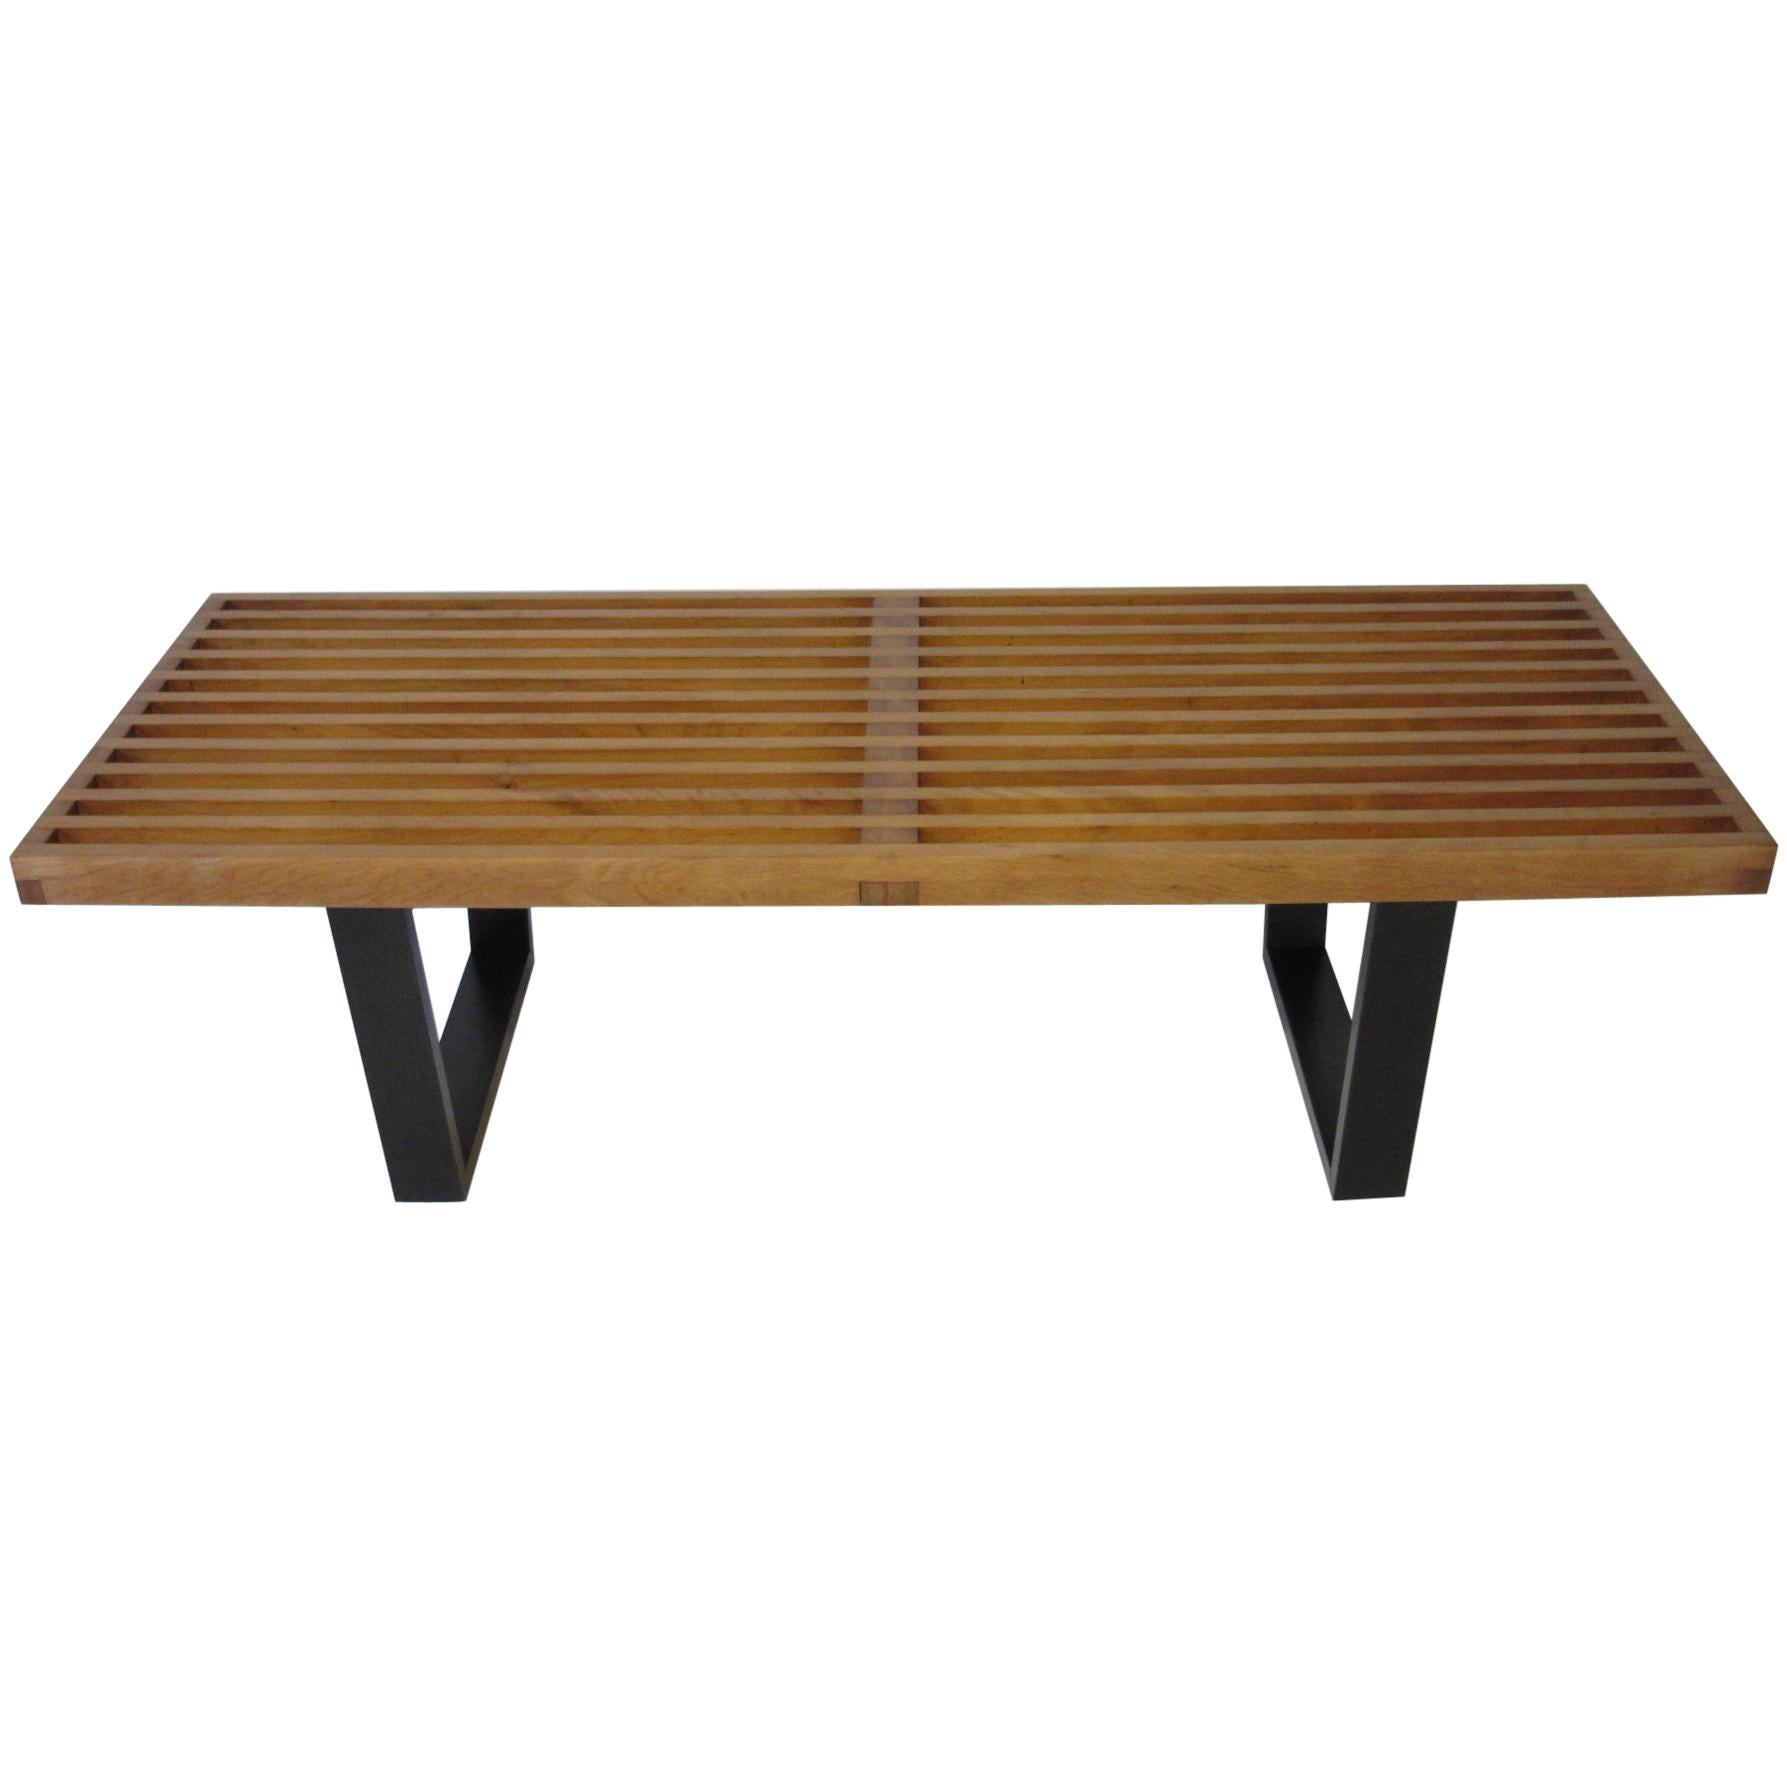 George Nelson Slat Bench or Coffee Table by Herman Miller